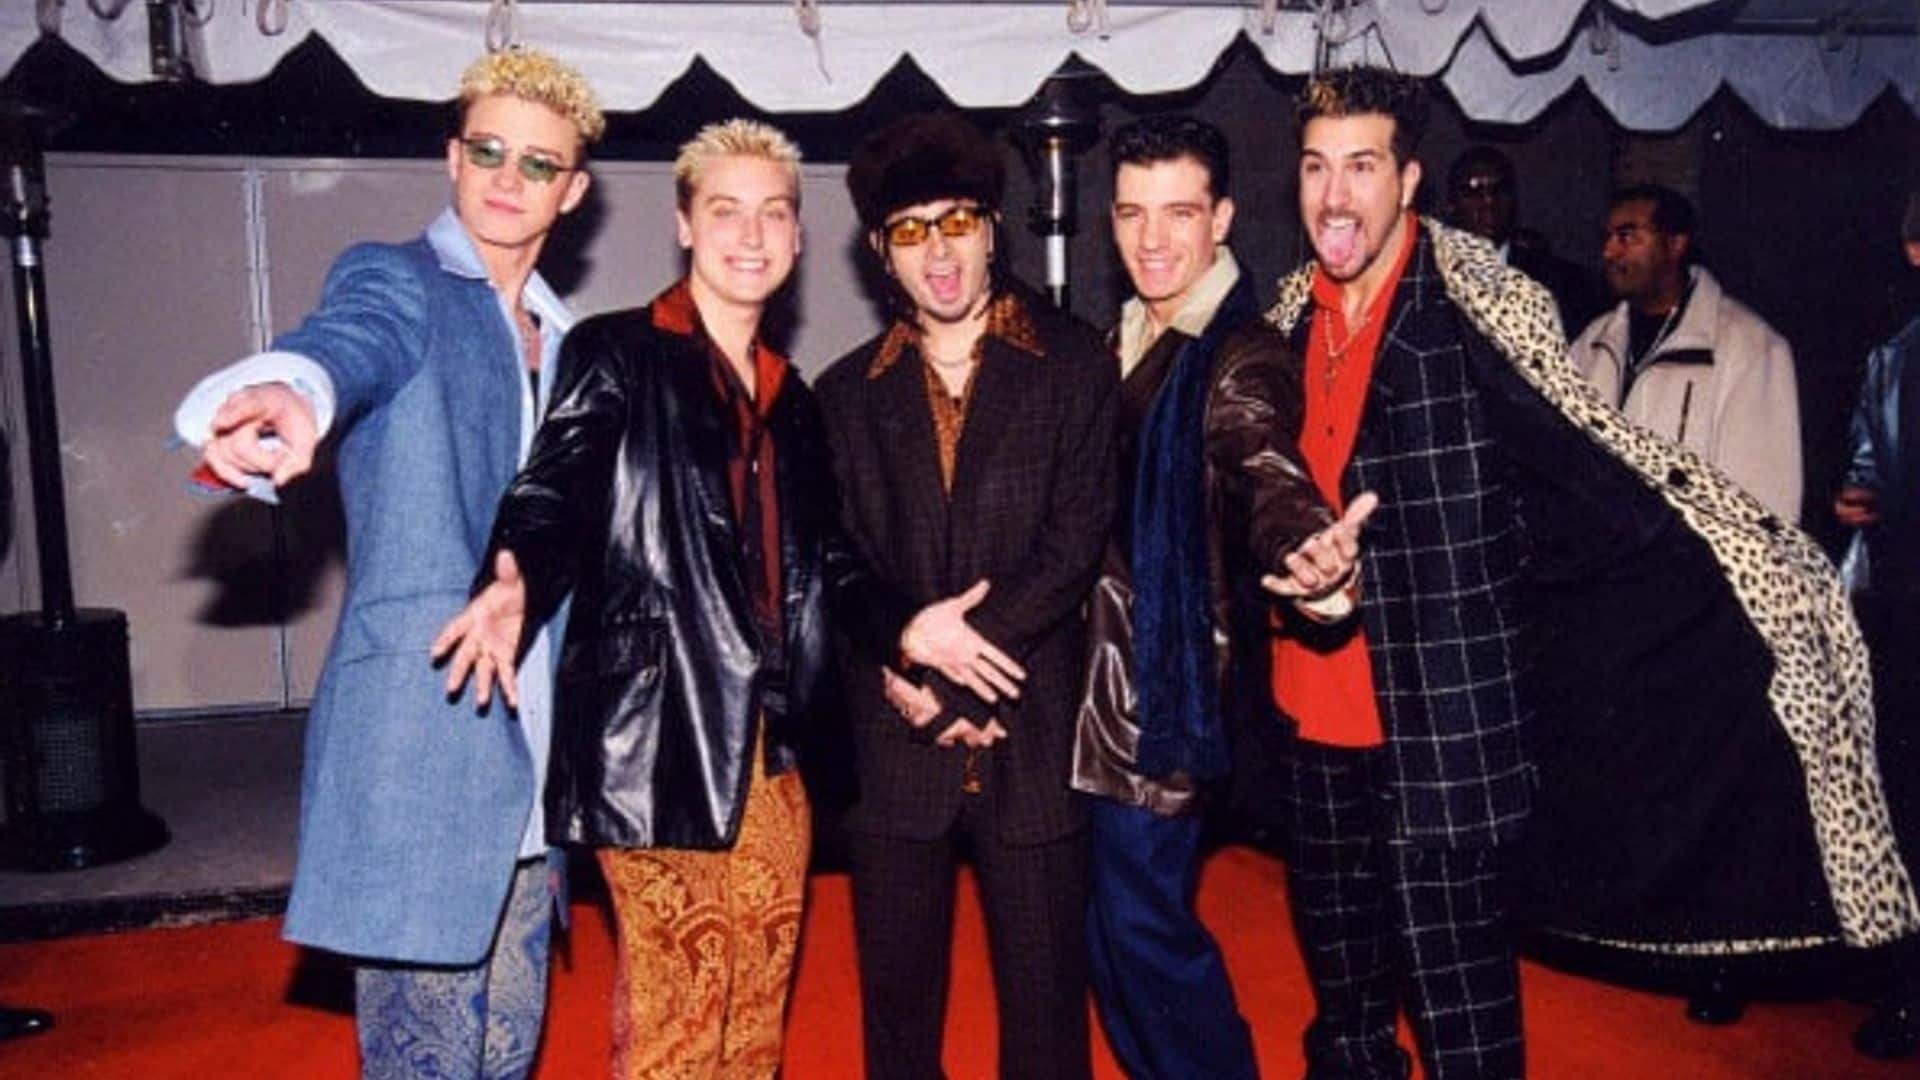 *NSync and in style! Justin (his frosted tips) and his former bandmates Lance Bass, Chris Kirkpatrick, JC Chasez and Joey Fatone rocked funky suits during the Billboard Music Awards in December 1998 in L.A.
<br>
Photo: Getty Images